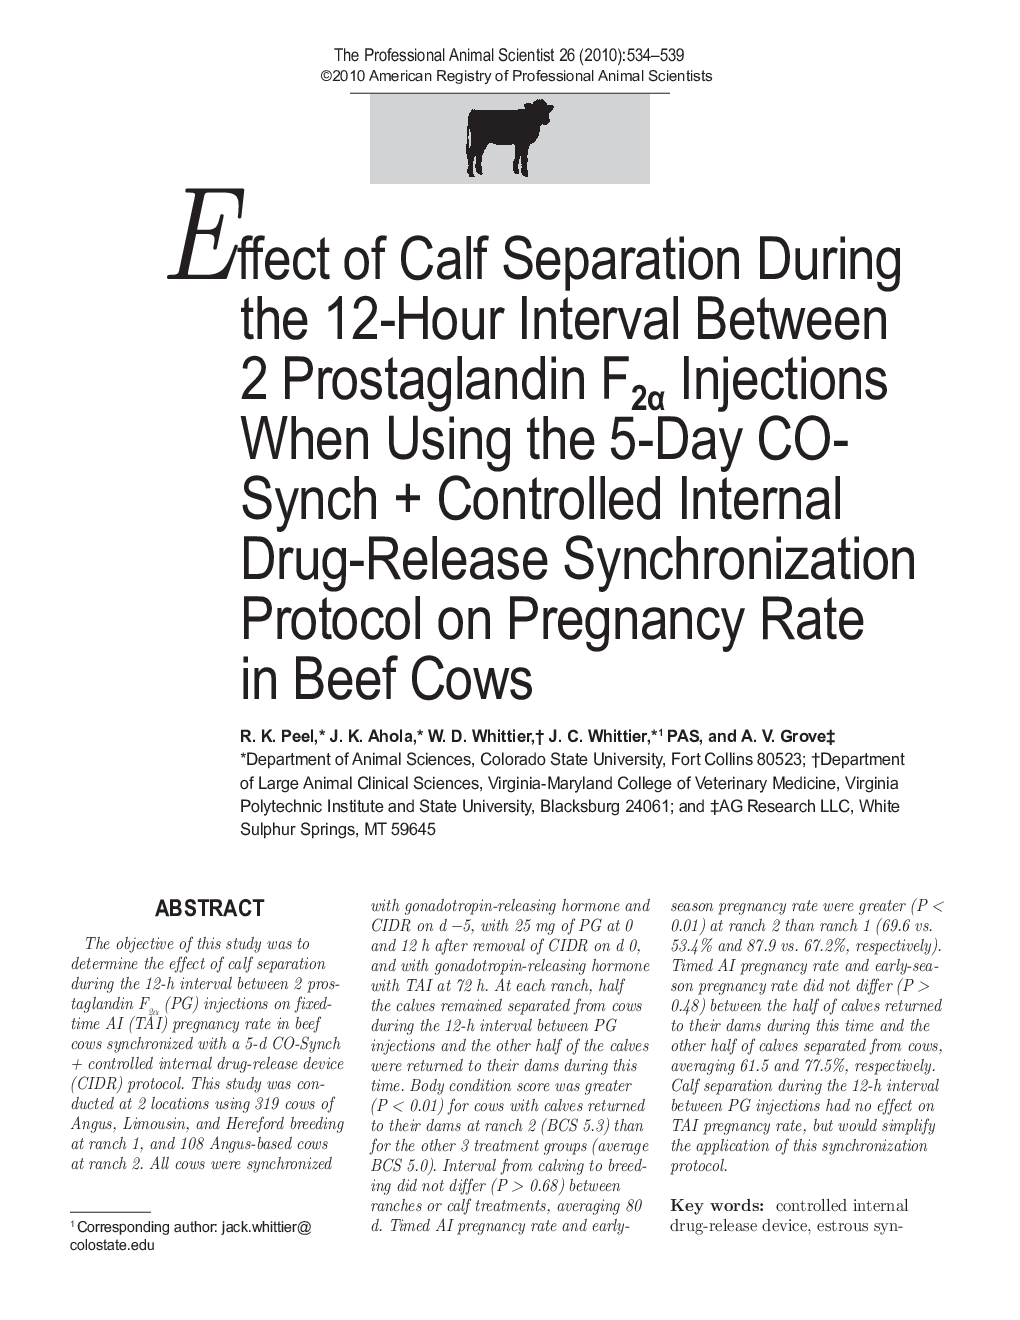 Effect of Calf Separation During the 12-Hour Interval Between 2 Prostaglandin F2Î± Injections When Using the 5-Day CO-SynchÂ +Â Controlled Internal Drug-Release Synchronization Protocol on Pregnancy Rate in Beef Cows